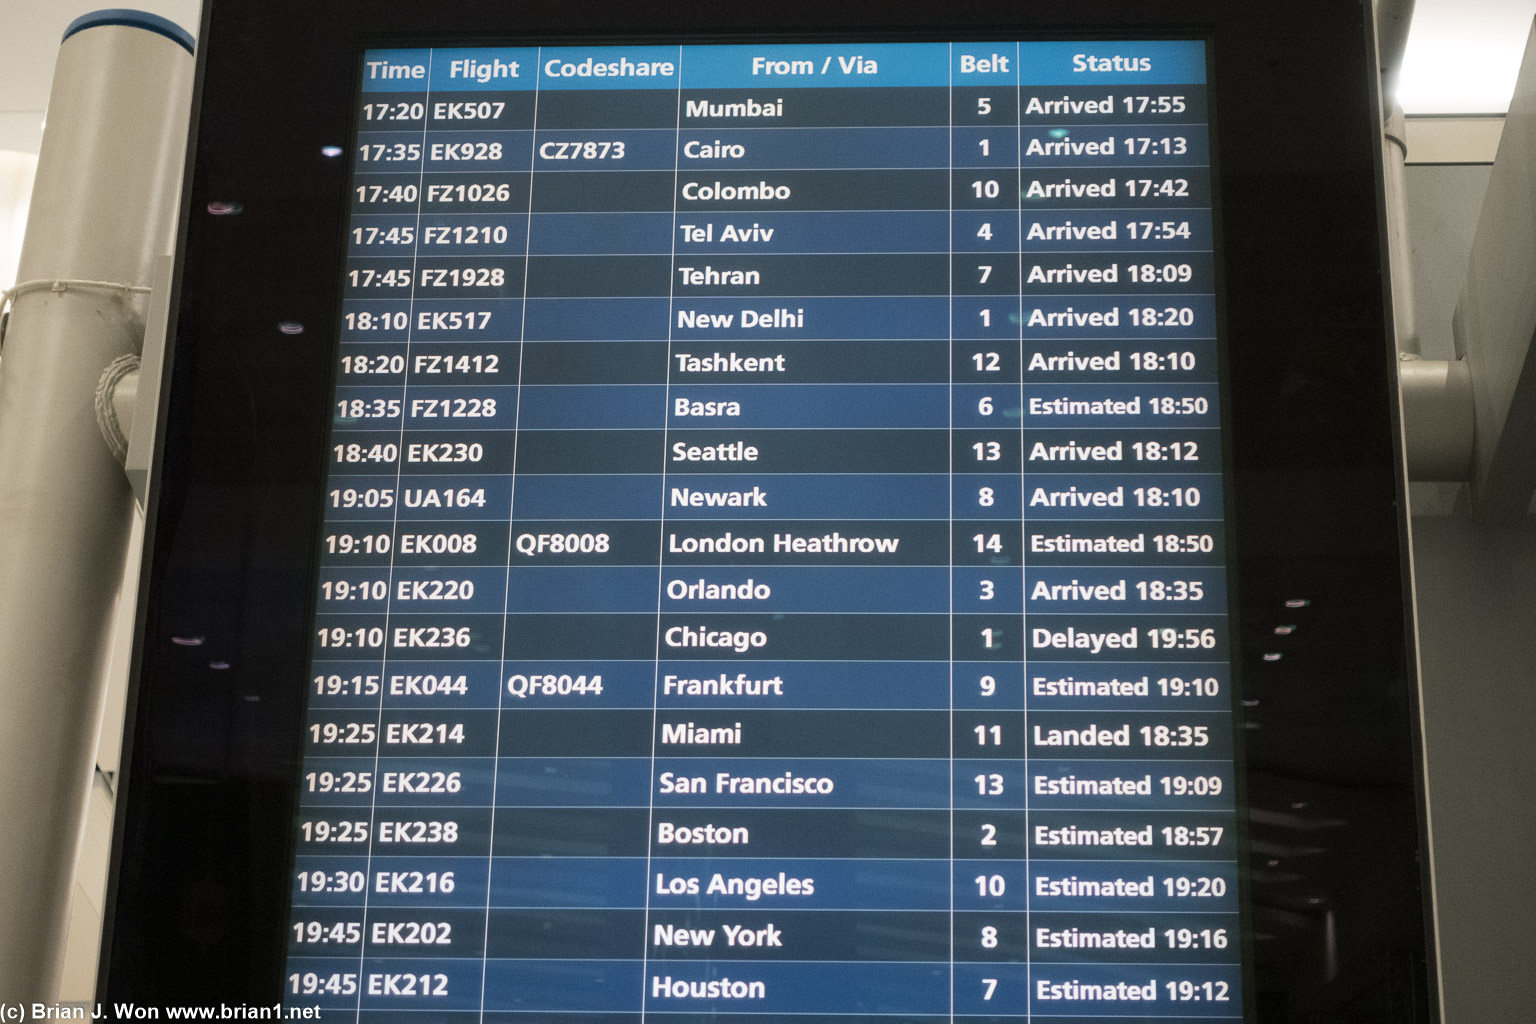 Hey there's a United flight on the board.